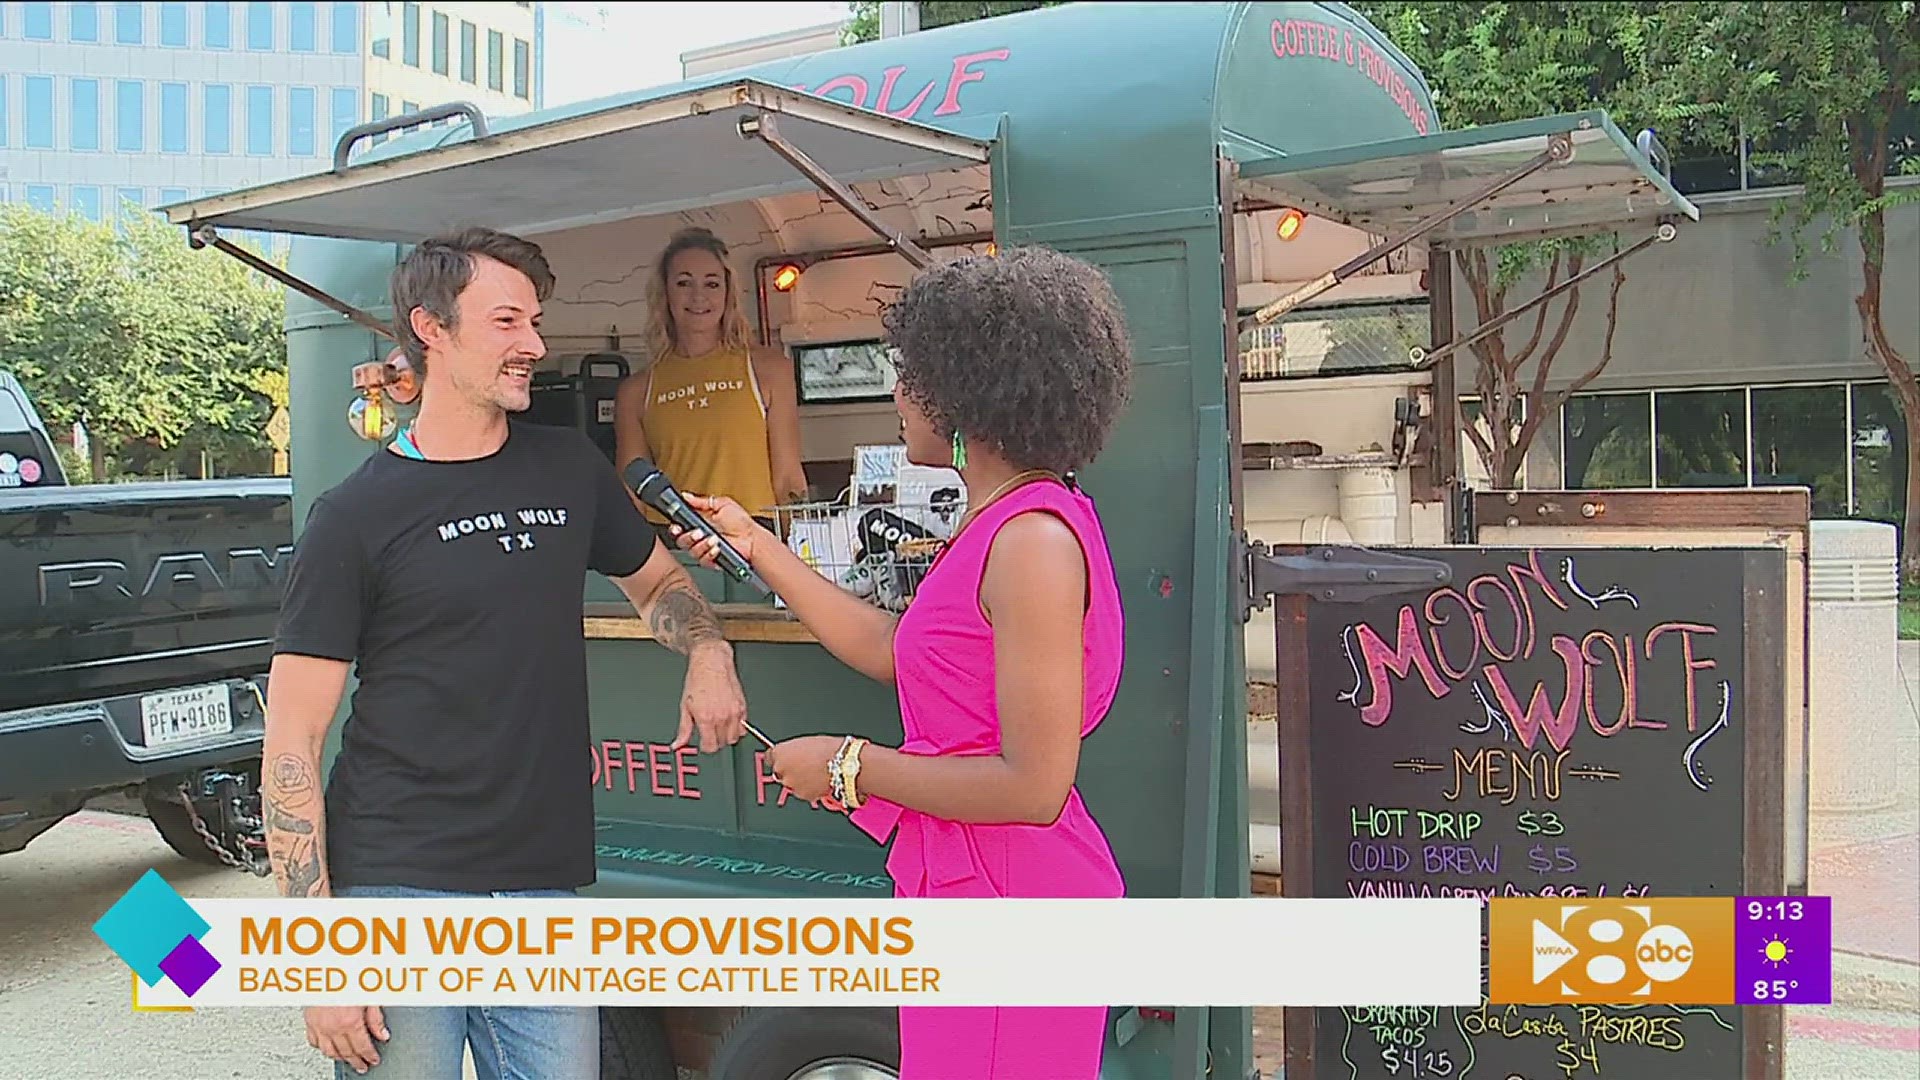 From an old goat trailer to a coffee truck, get ready to take a sip on the wild side with Moon Wolf Provisions. Erin gets a taste of what they're about.